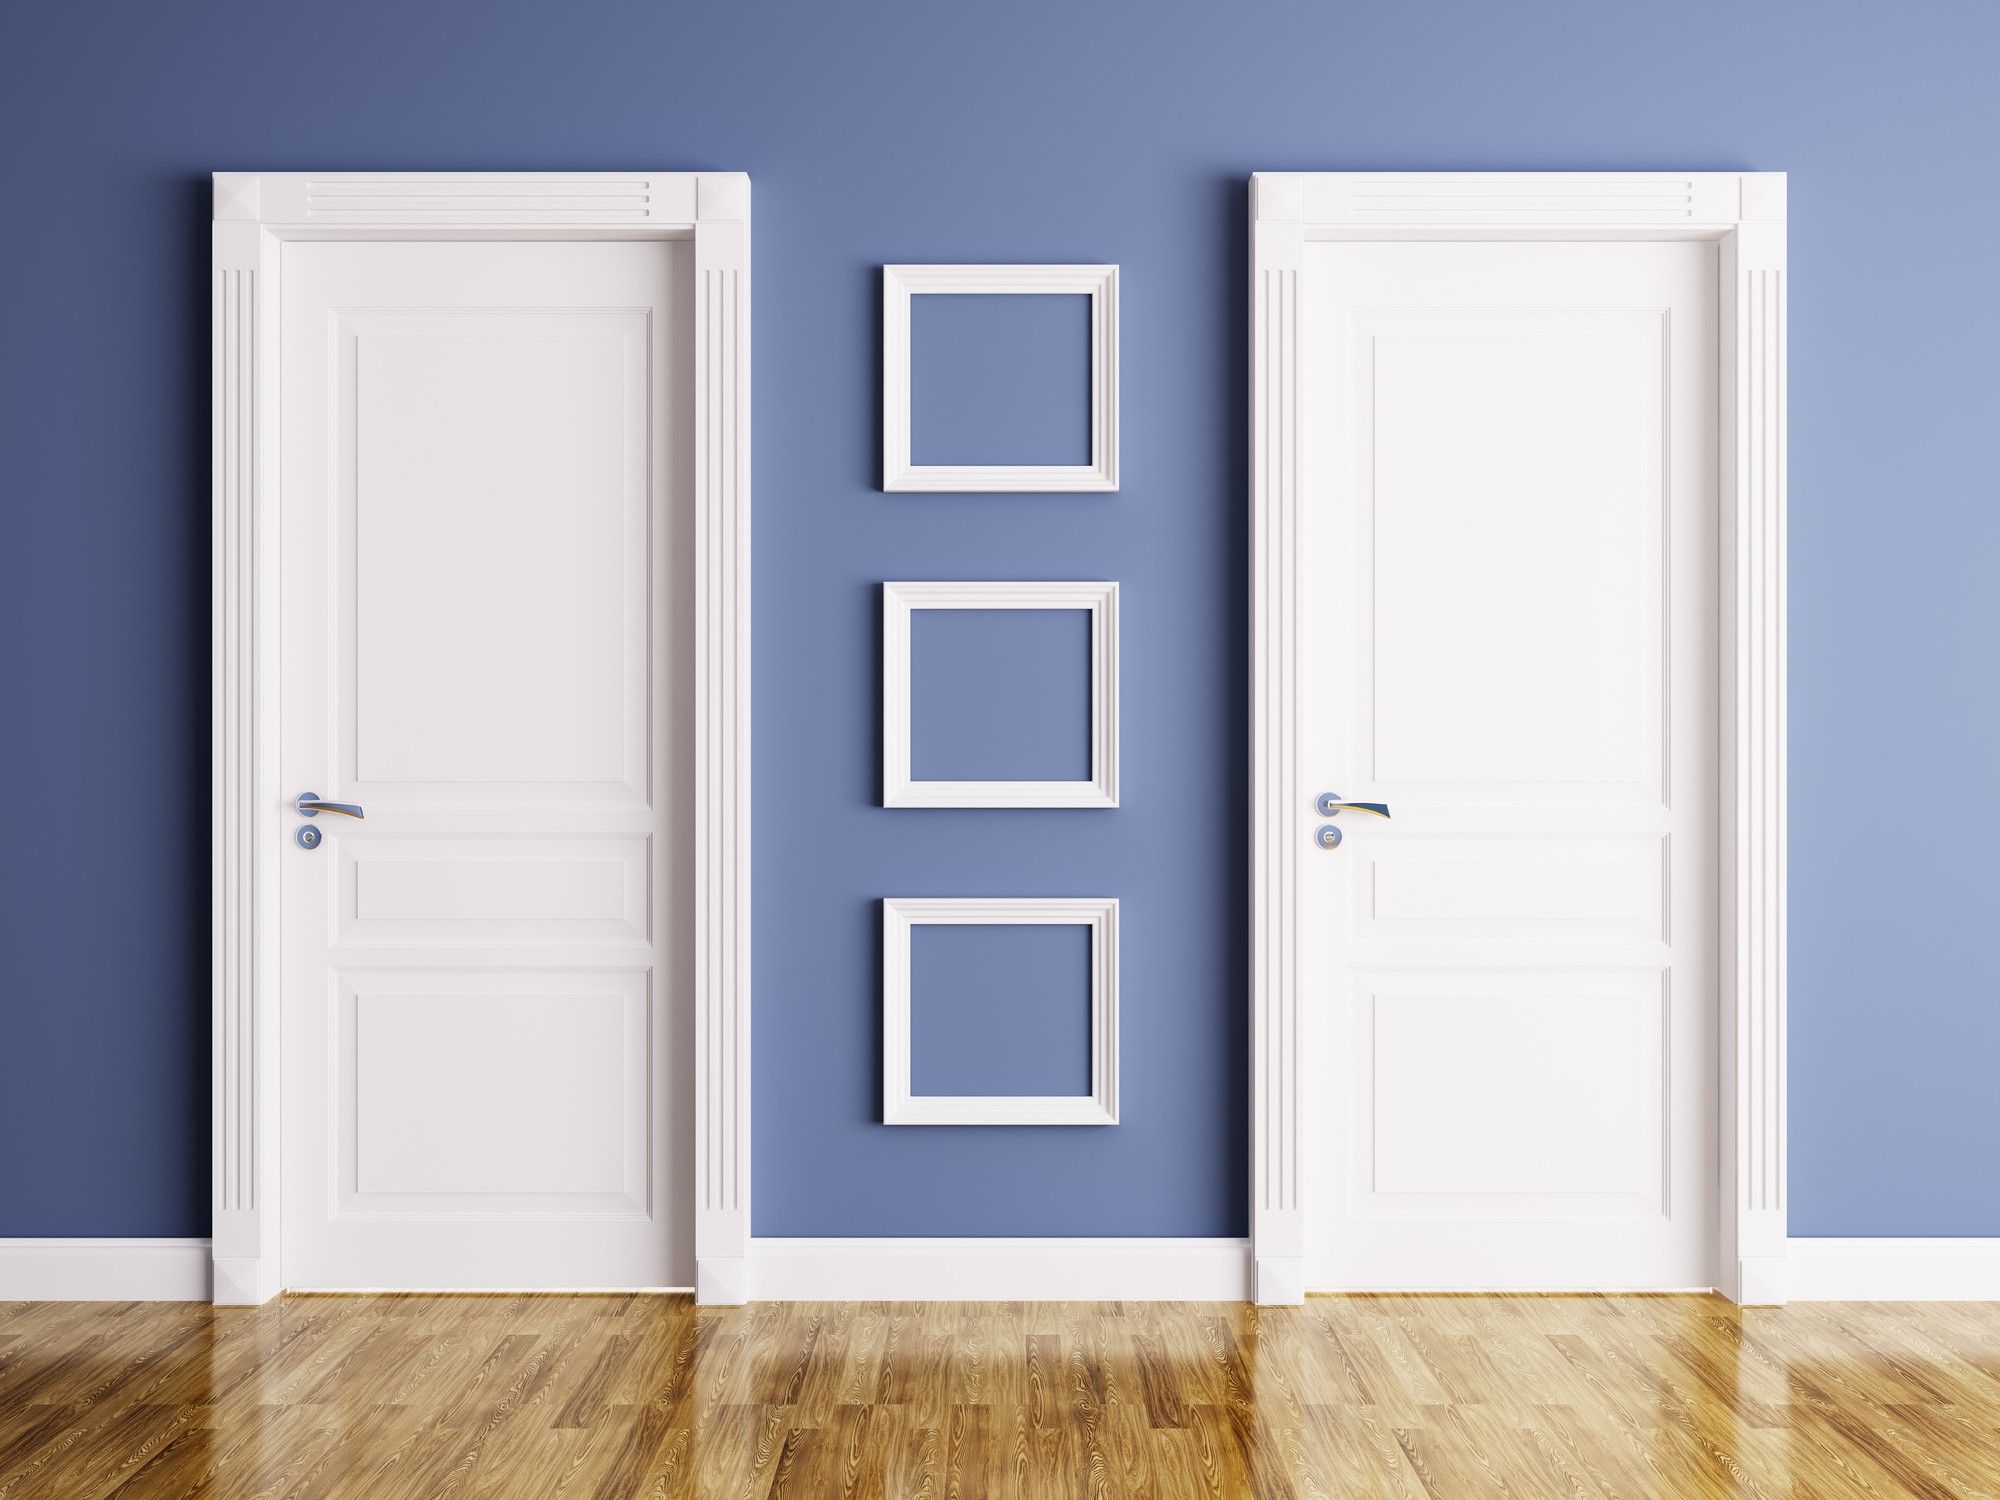 Masonite molded interior doors were allegedly subject to price-fixing.